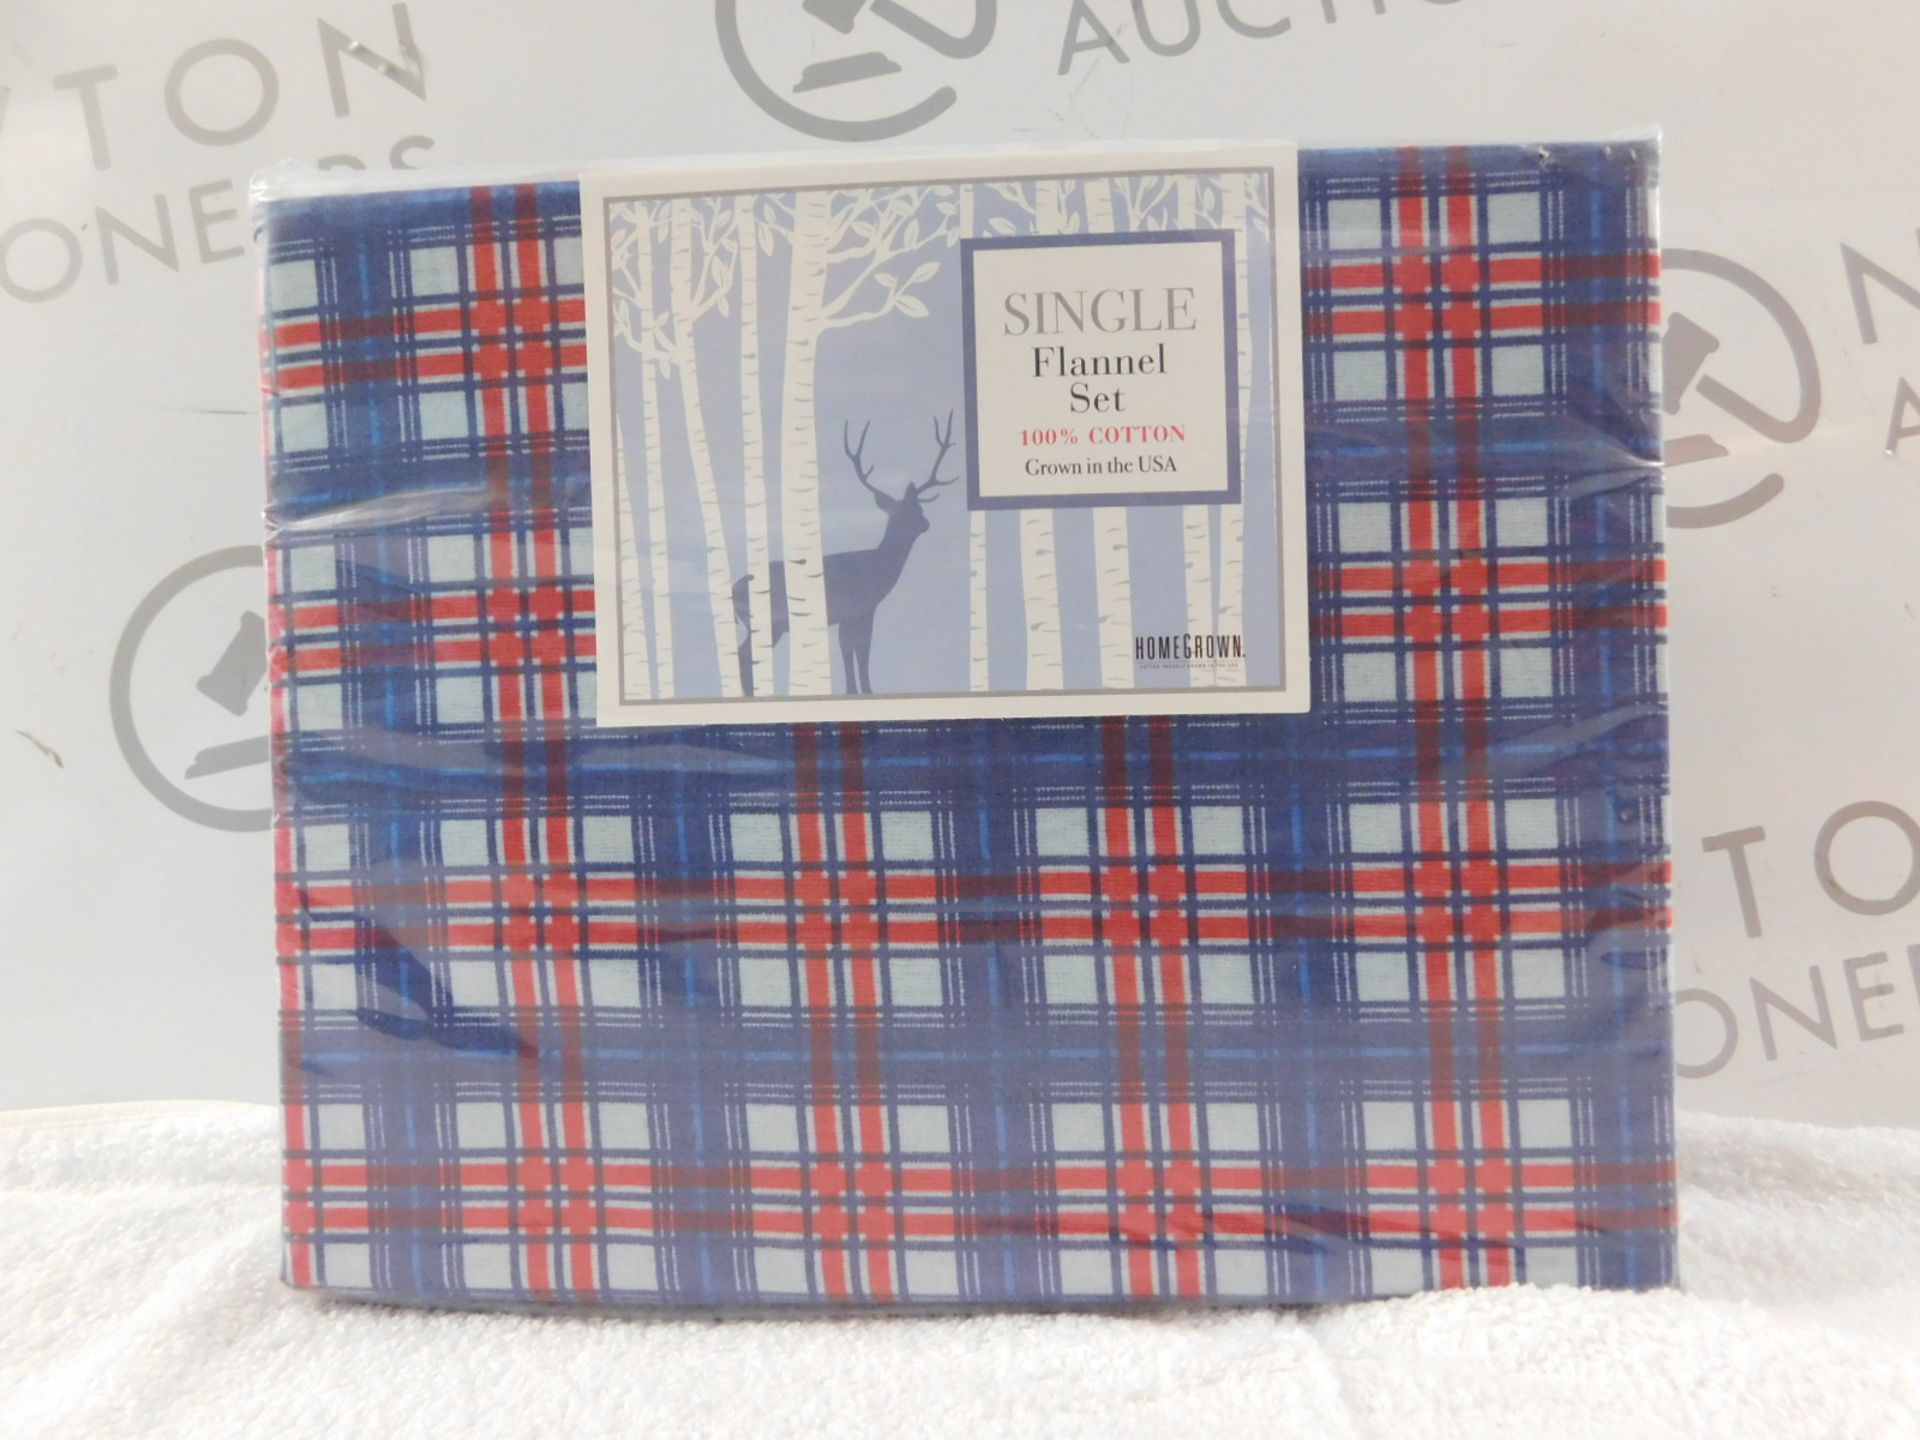 1 BRAND NEW PACK OF HOMEGROWN BLUE & RED STRIPE COTTON SINGLE FLANNEL SET RRP £19.99